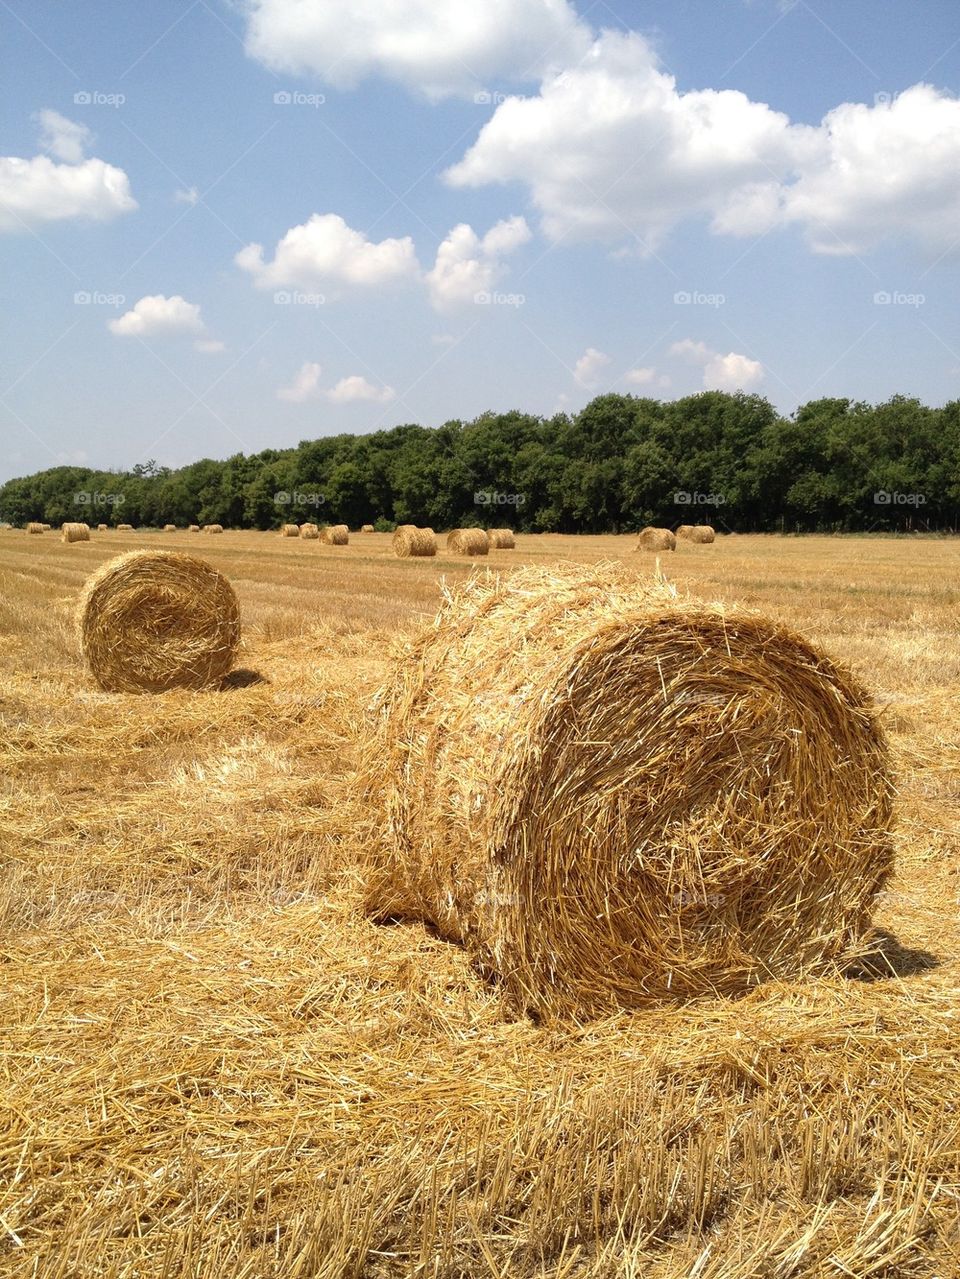 Rolled up hay on field